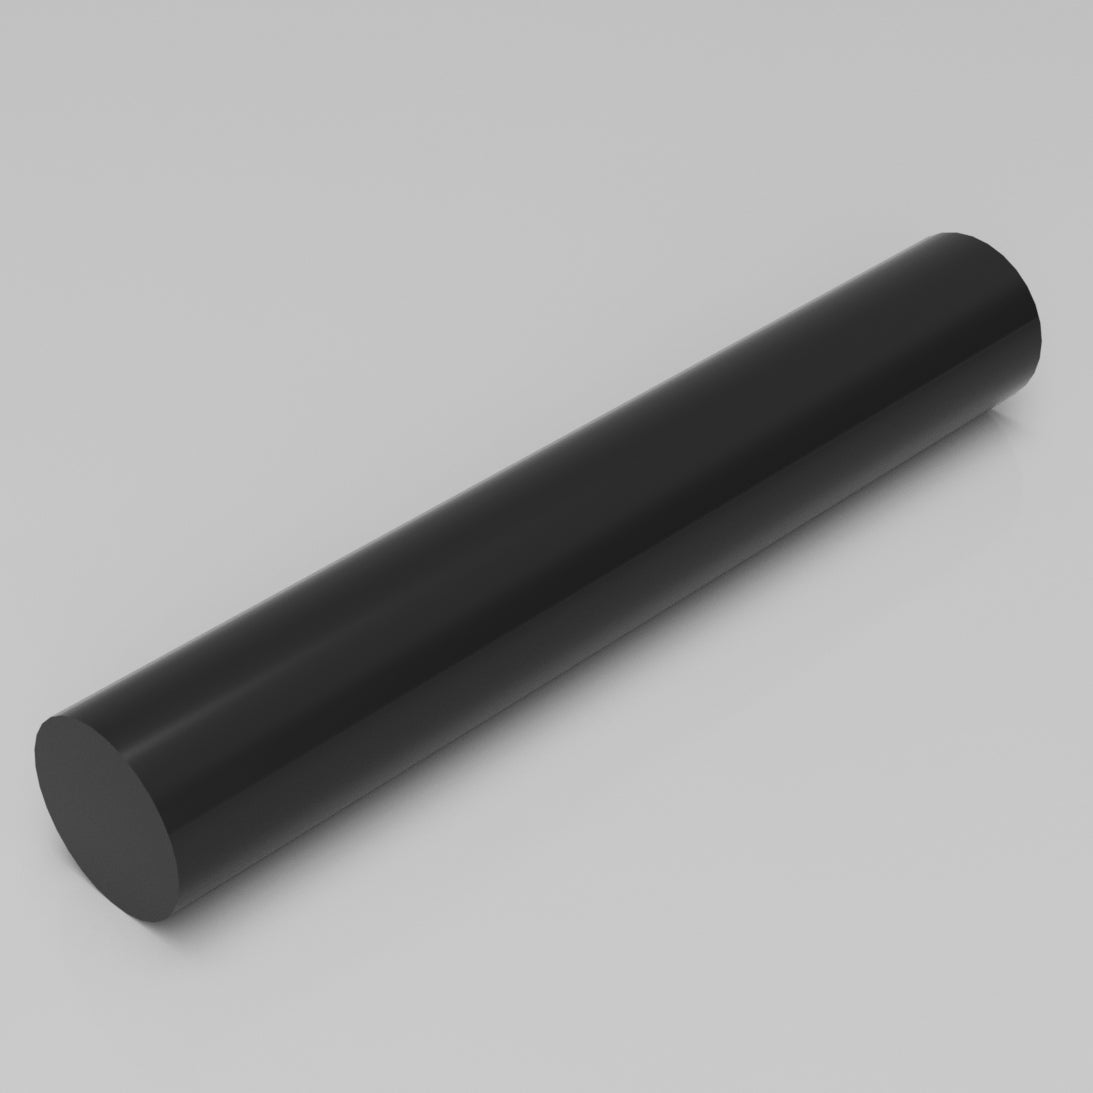 Machinable Wax Cylinder Bar Front View 2 Inch by 12 Inch